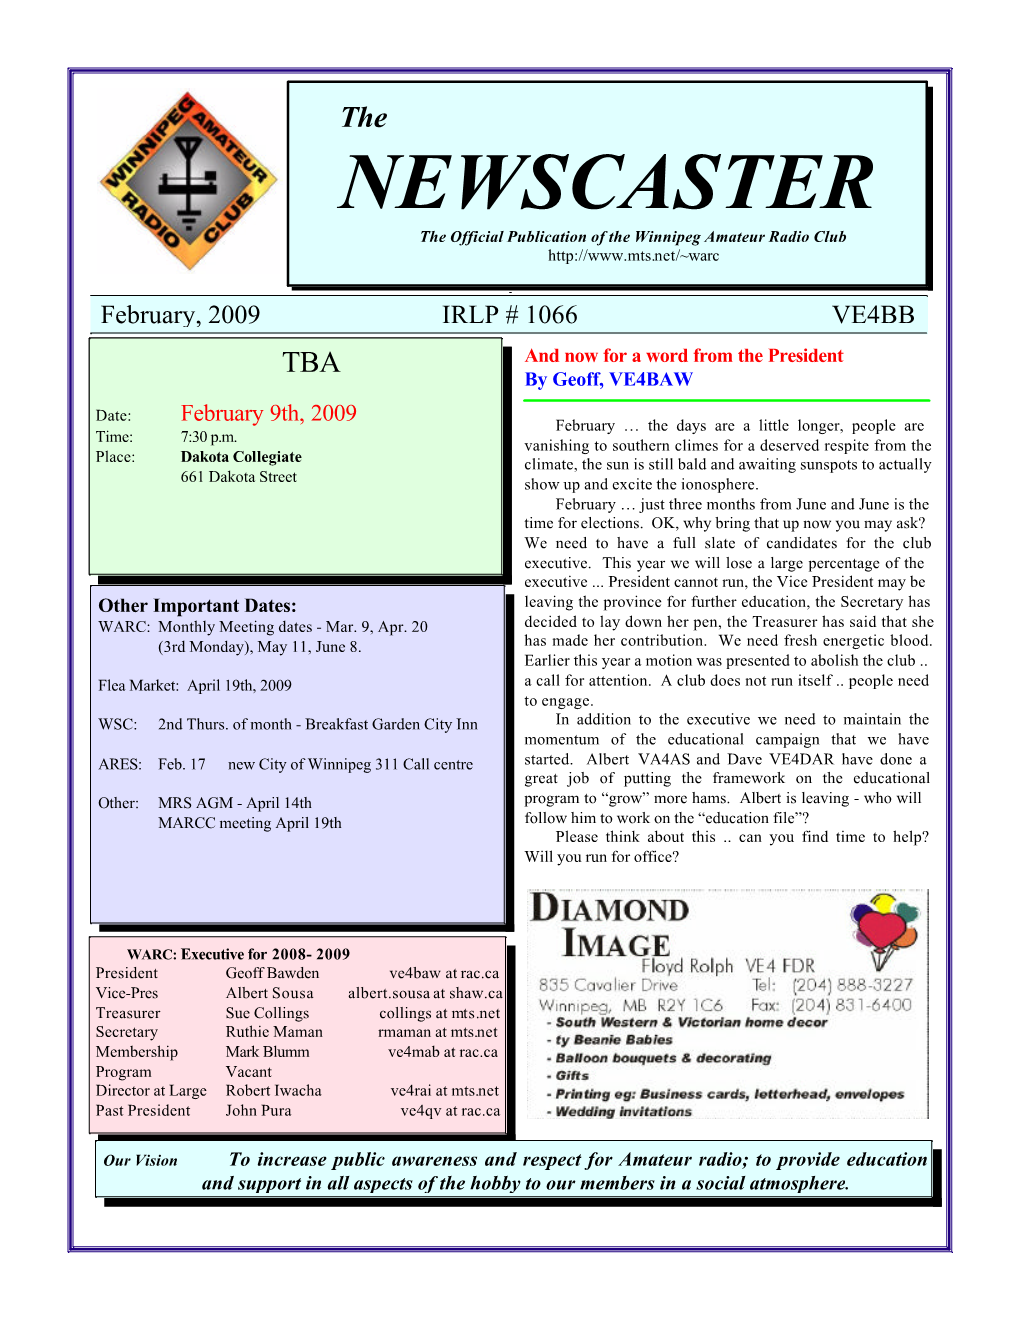 NEWSCASTER the Official Publication of the Winnipeg Amateur Radio Club